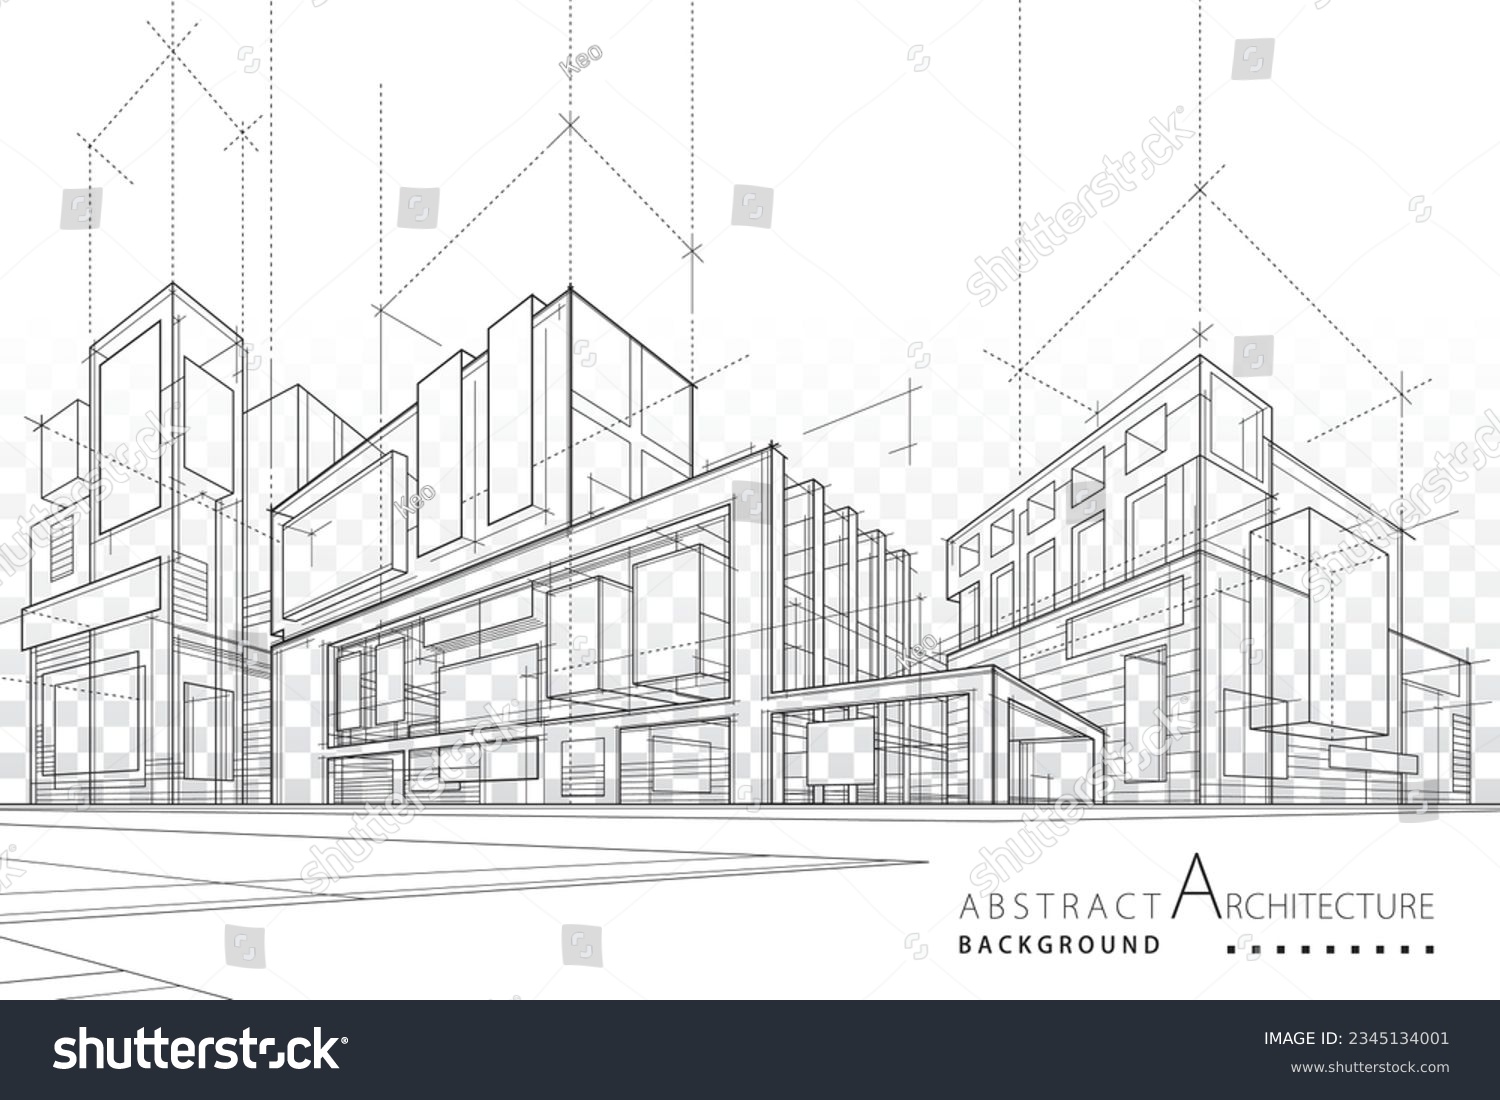 3D illustration abstract modern urban building out-line black and white drawing of imagination architecture building construction perspective design.  #2345134001